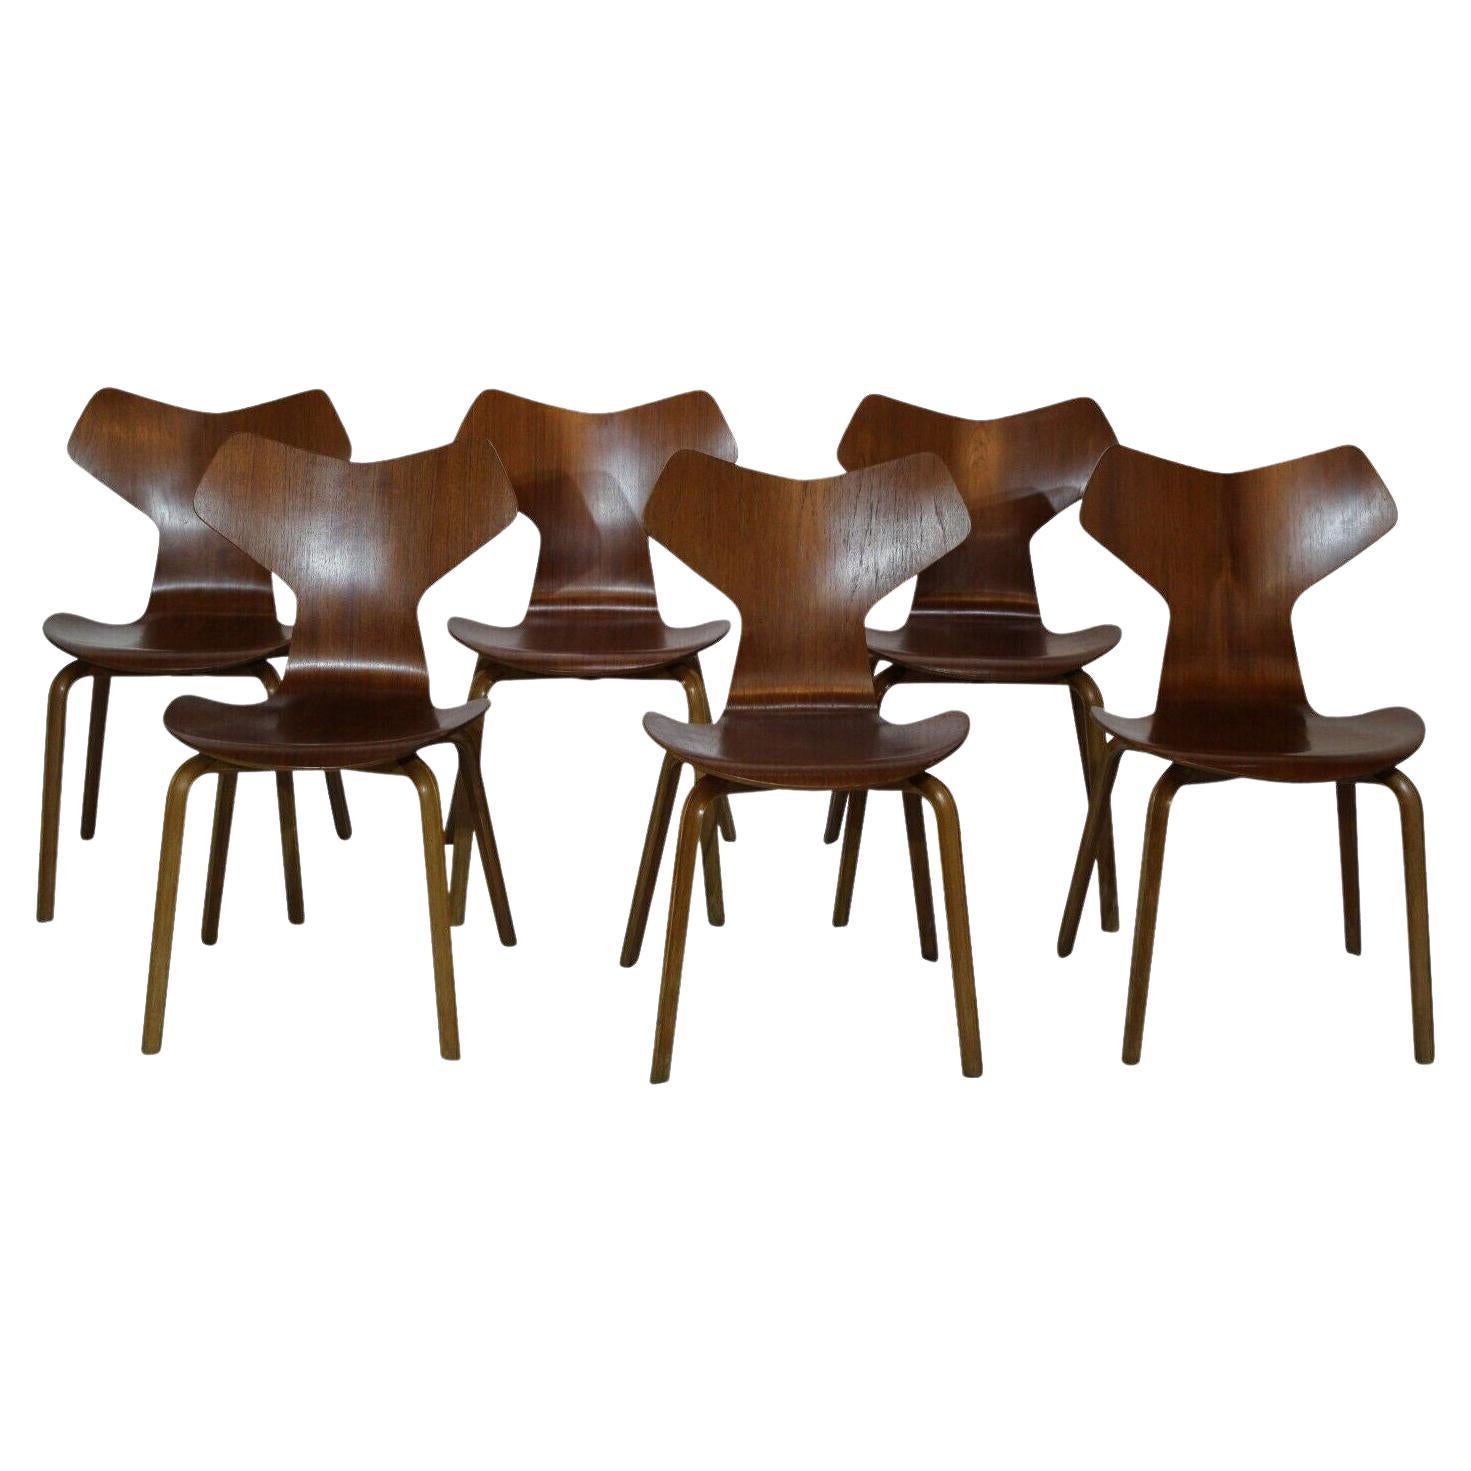 Arne Jacobsen, Set of 6 Iconic Grand Prix 3130 Chairs